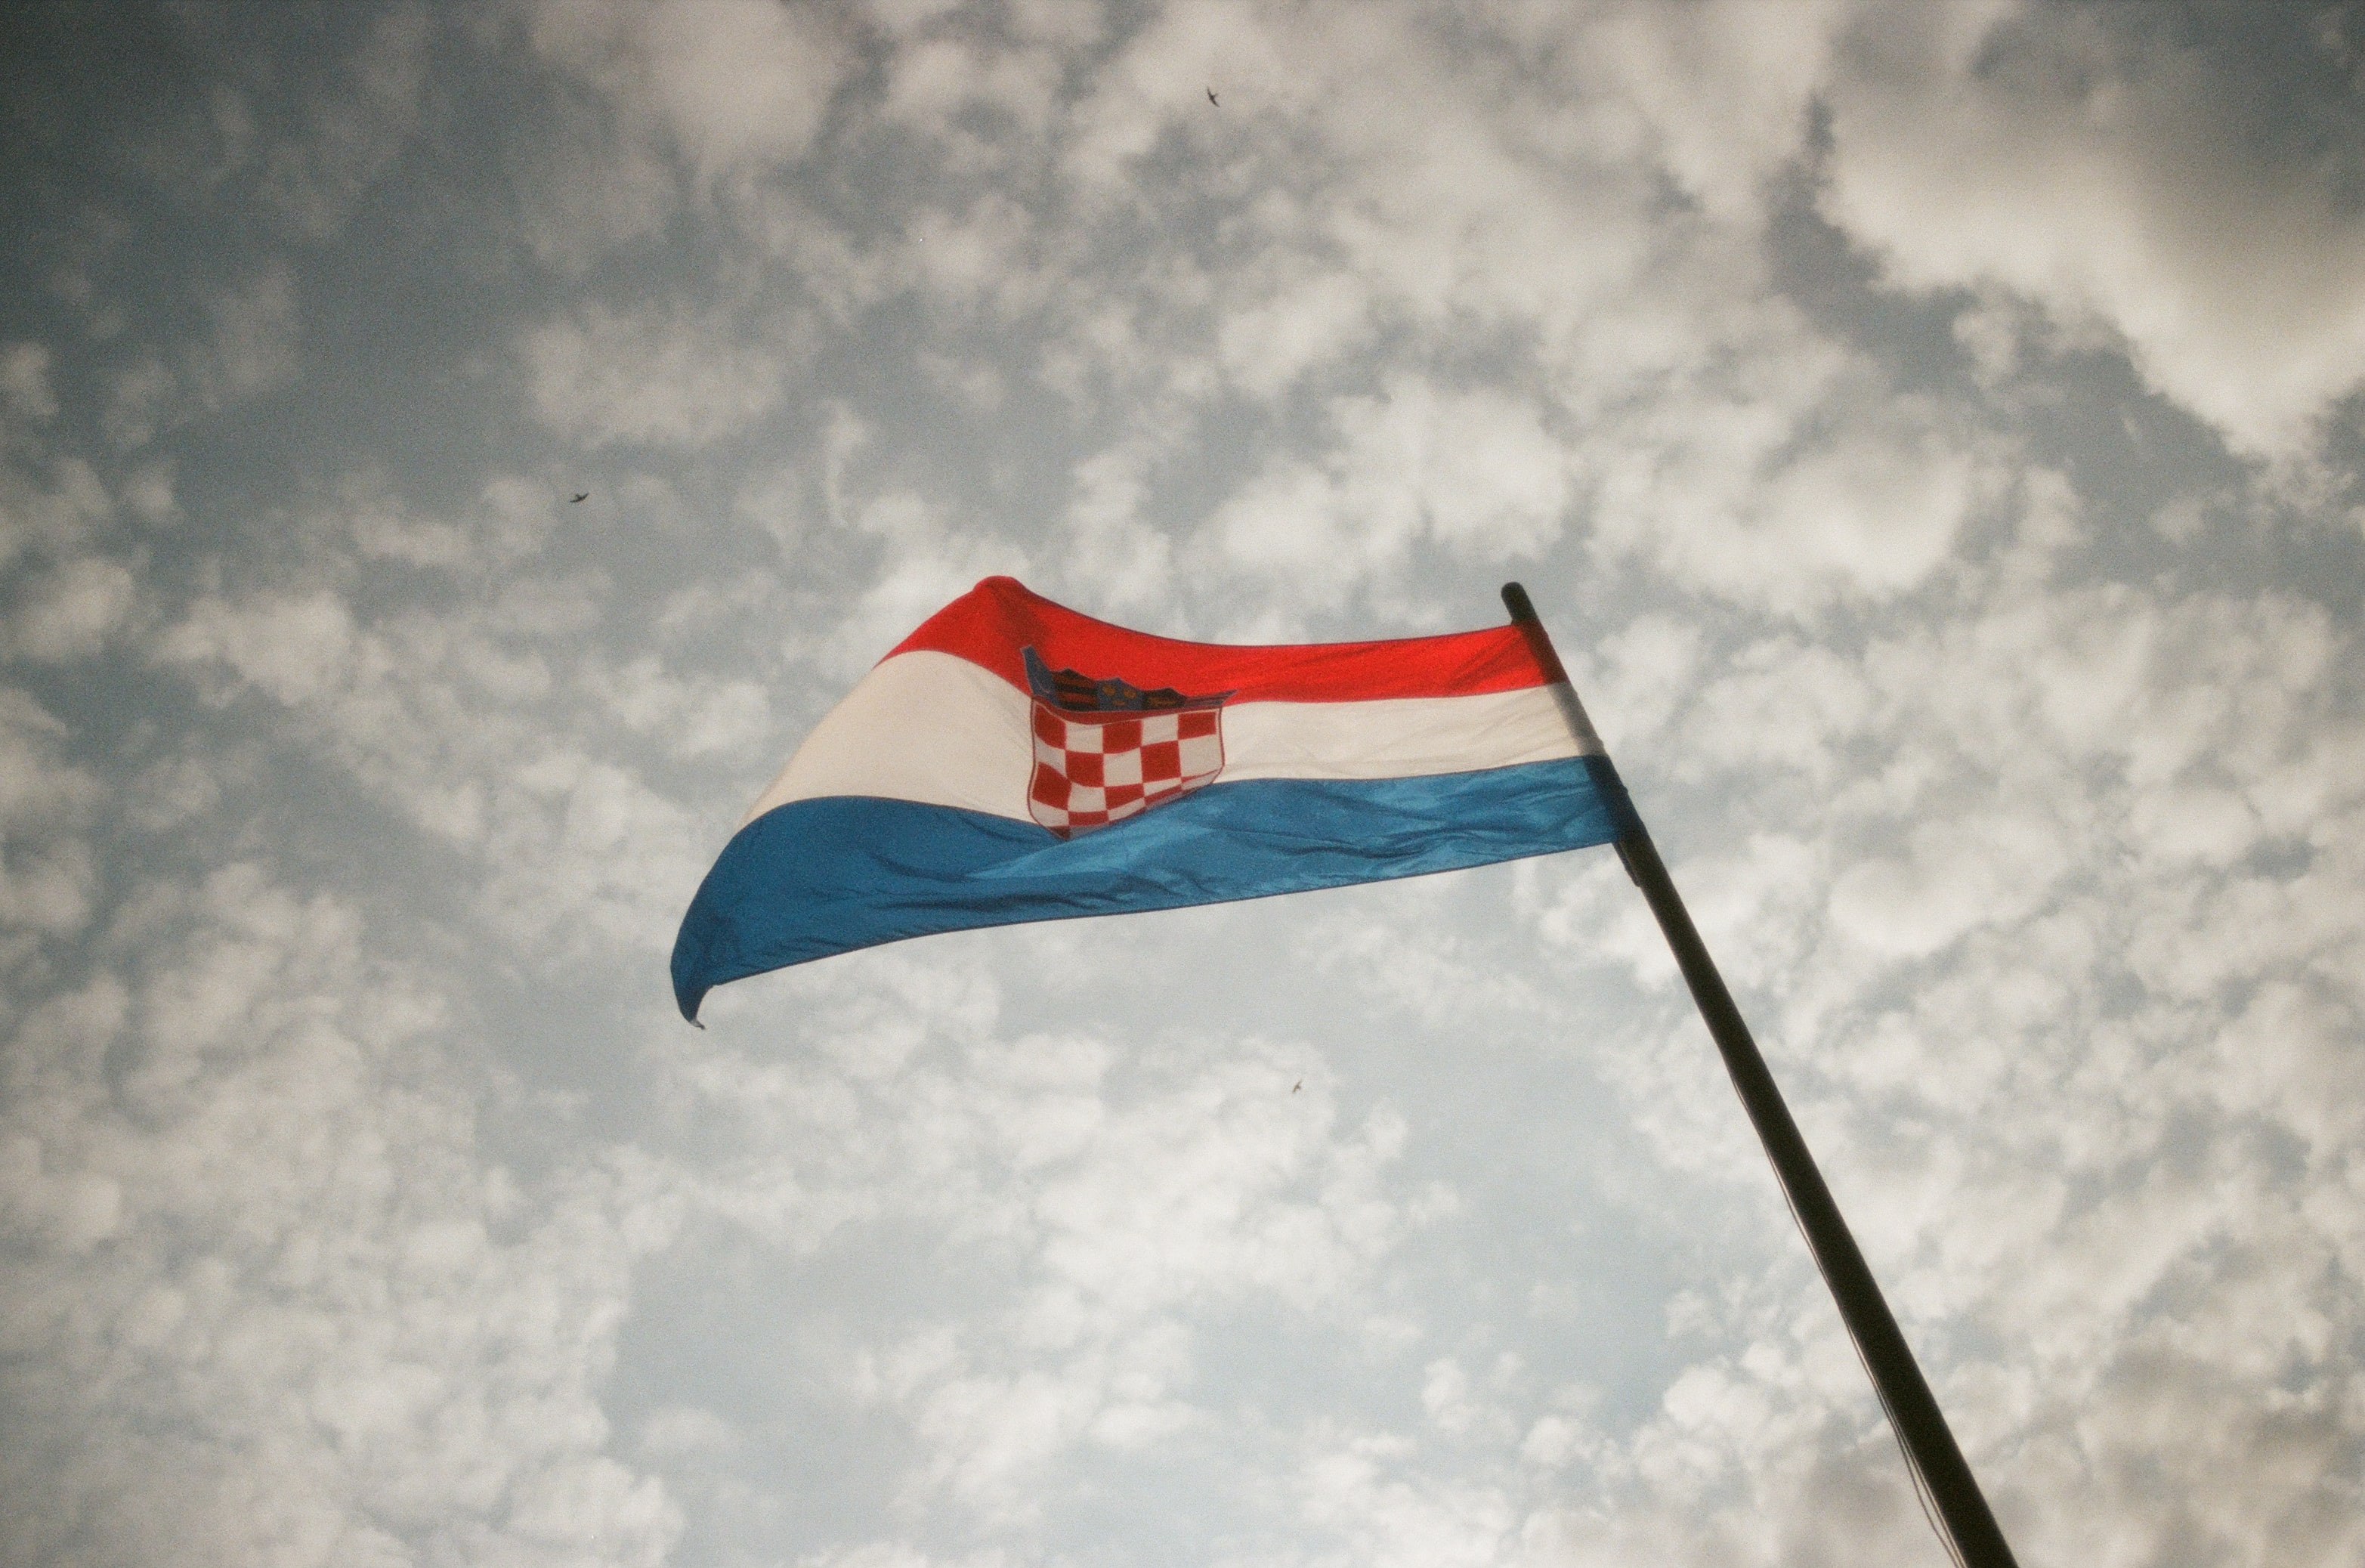 Insurance fraud and scams from Croatia